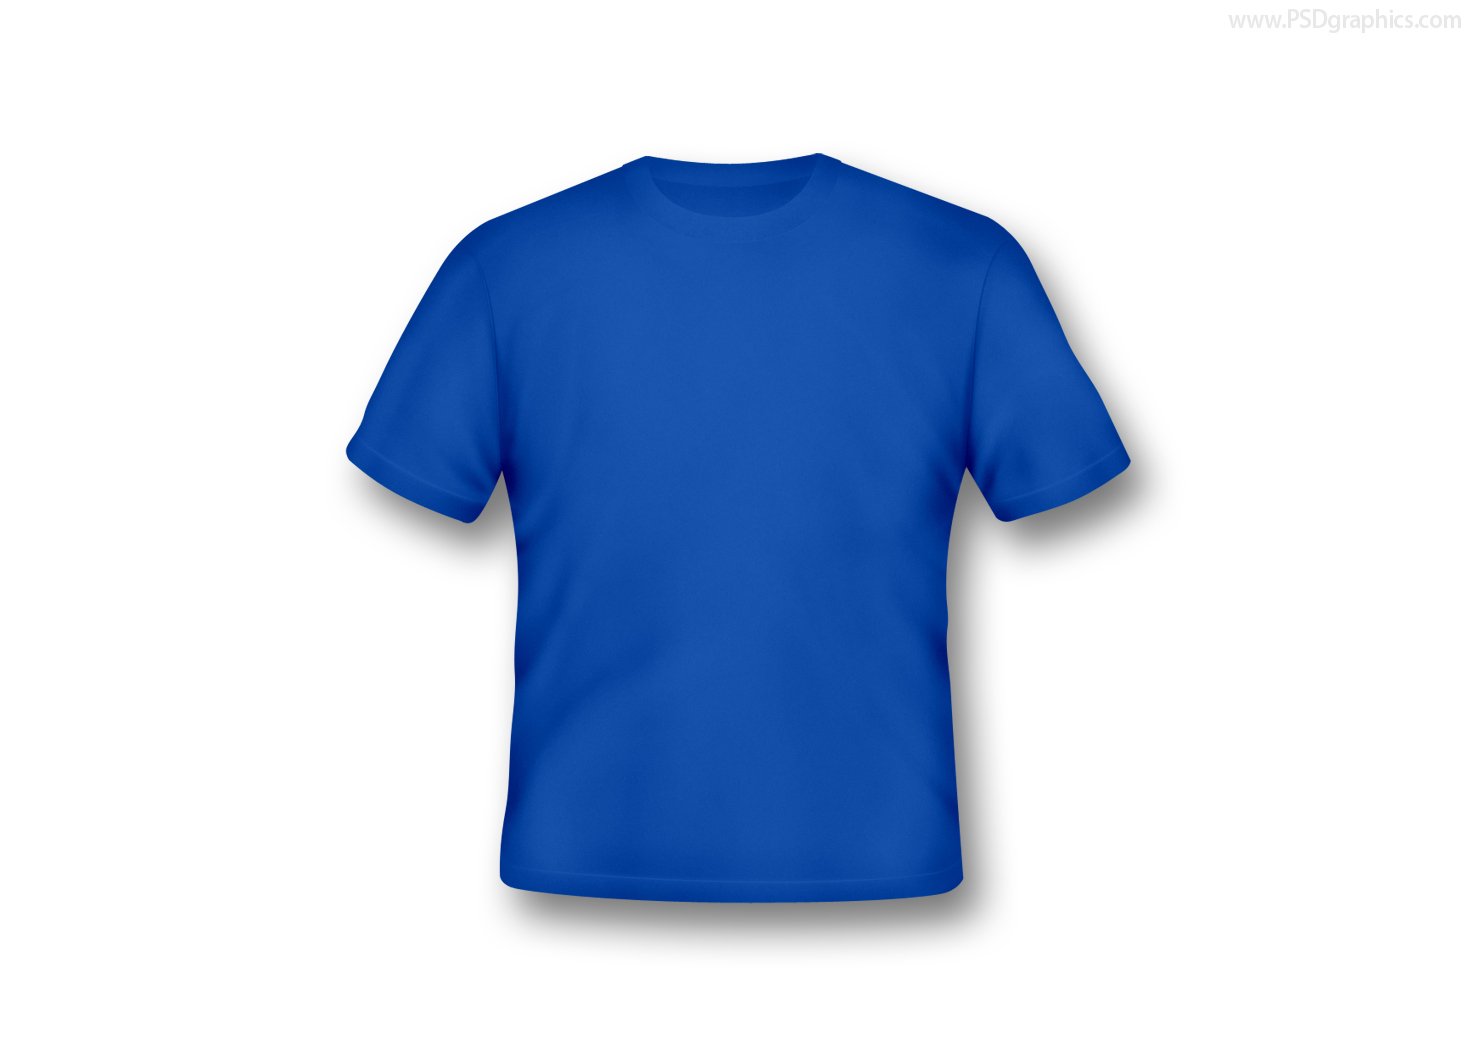 Blank t-shirts in various colors | PSDGraphics